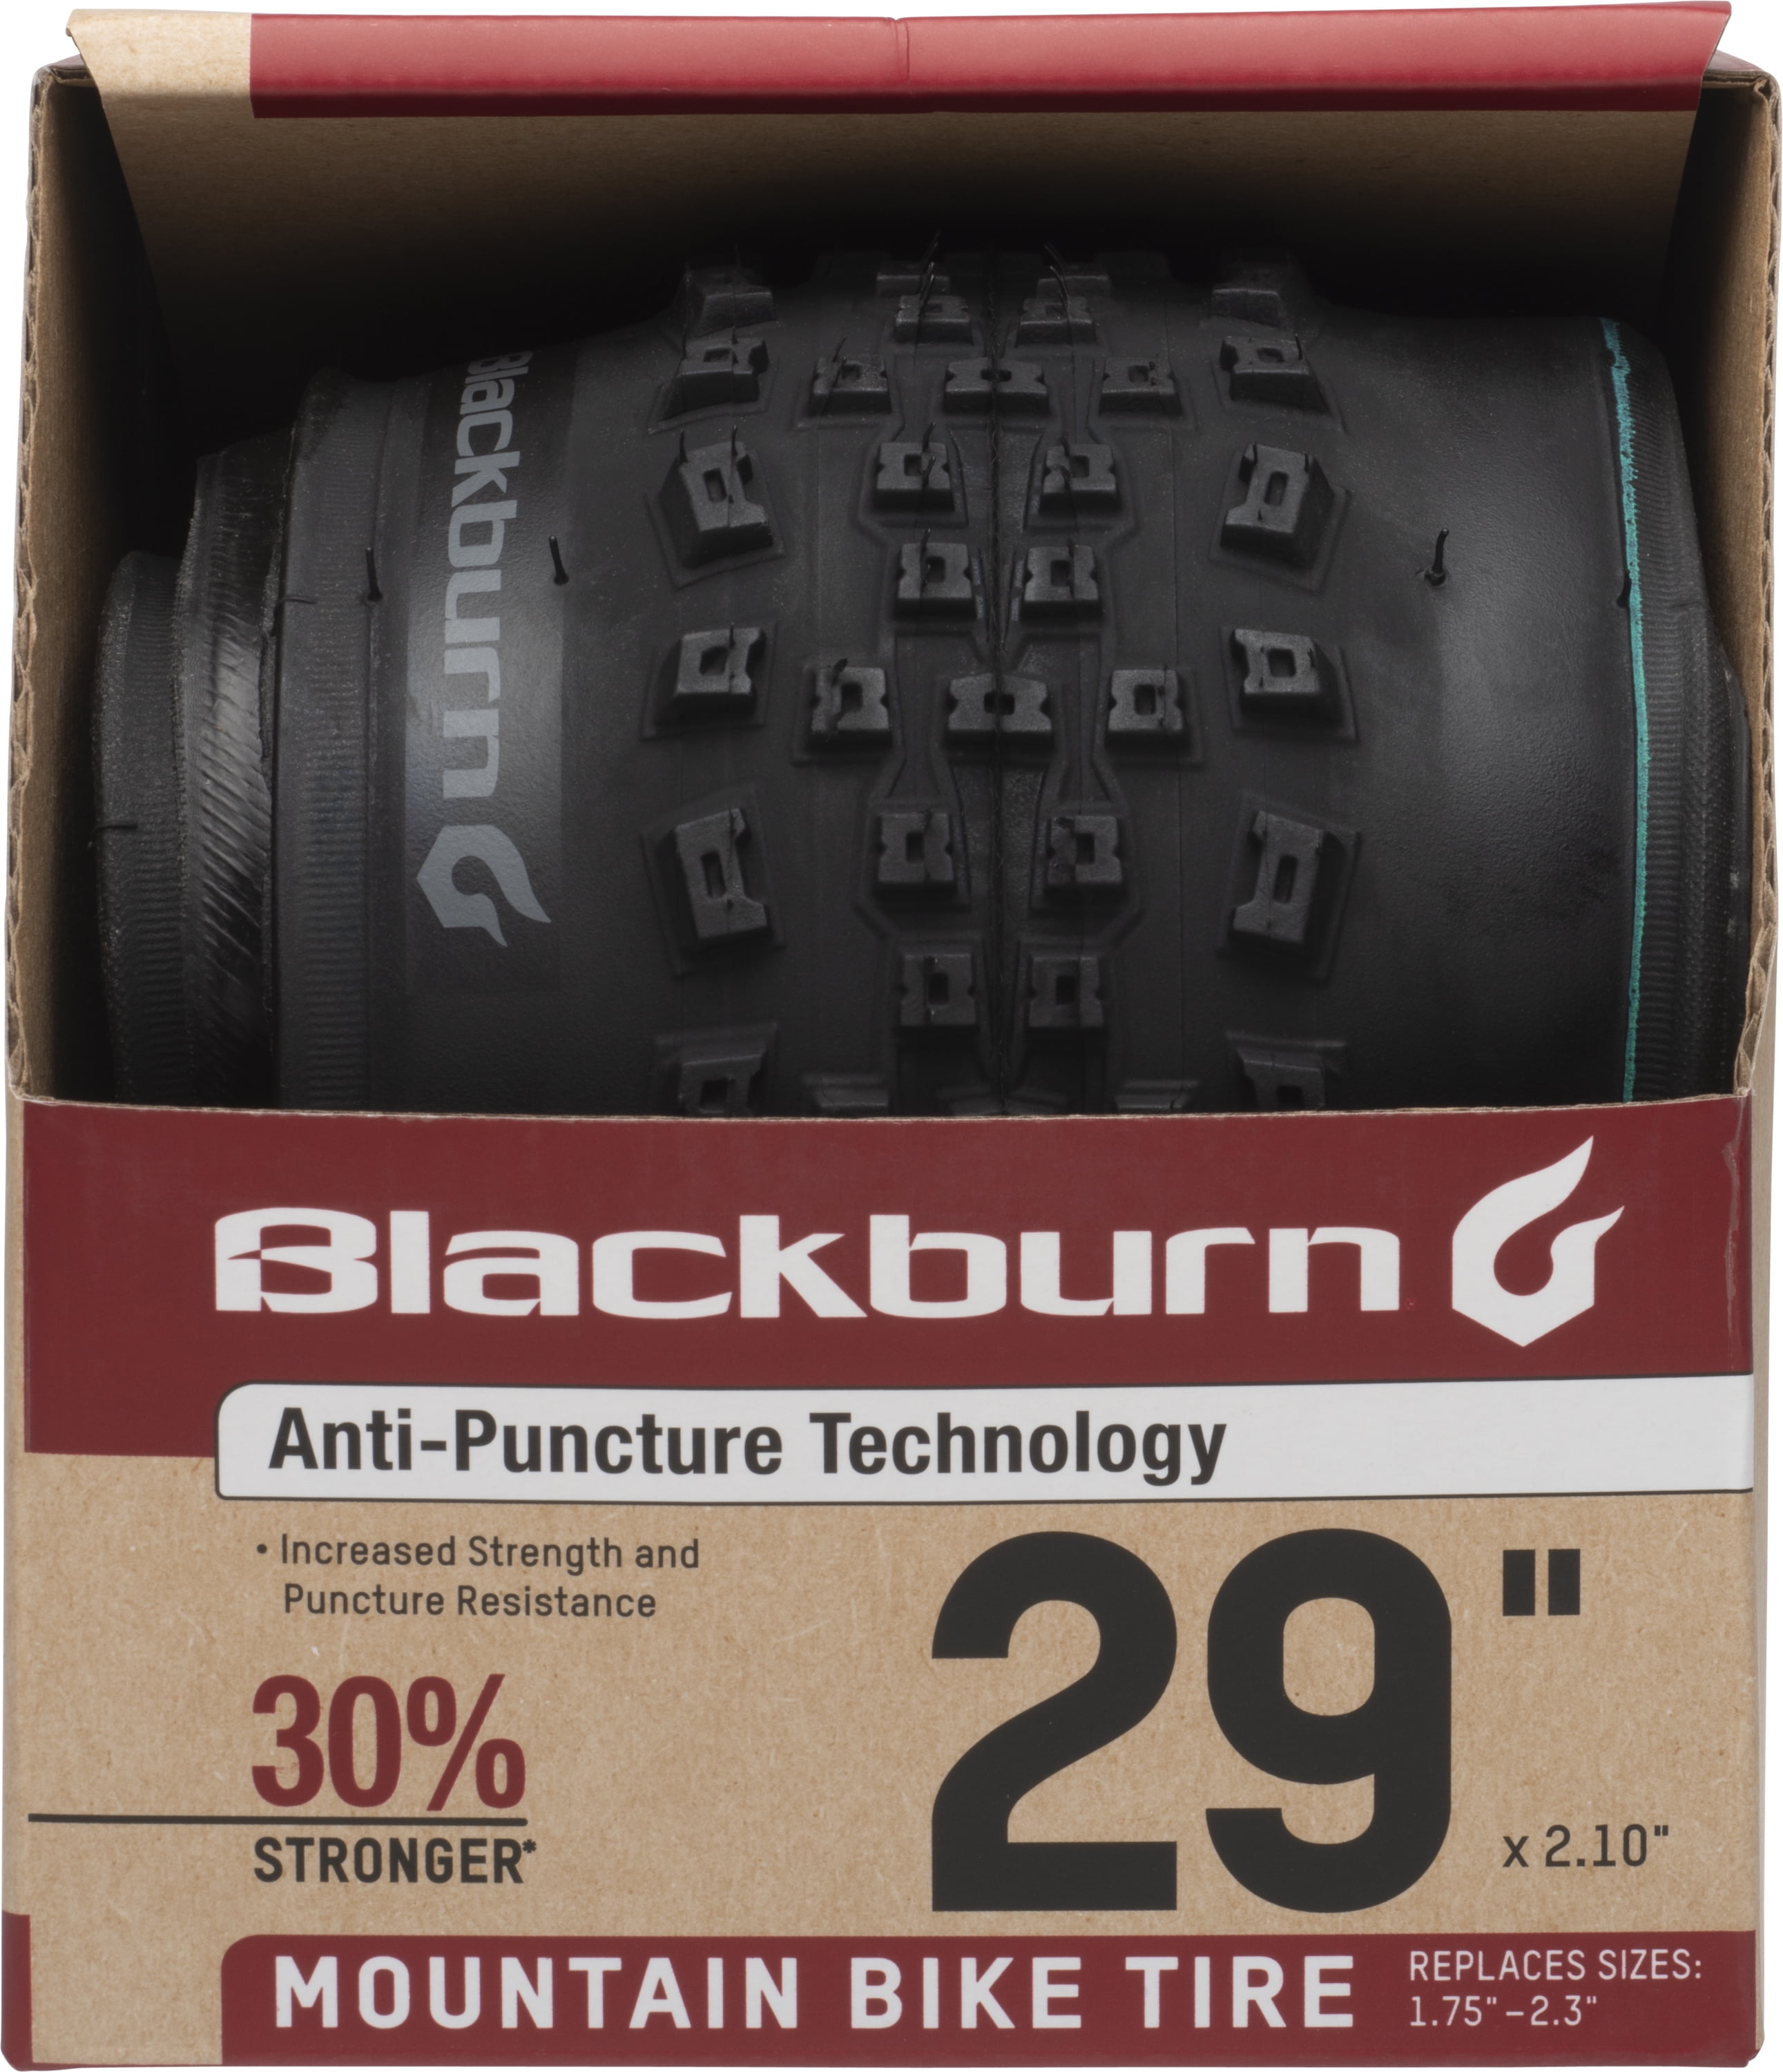 Bell Mountain Bike Tire 20” X 2.10 Air Guard Anti-puncture 30 Stronger for sale online 